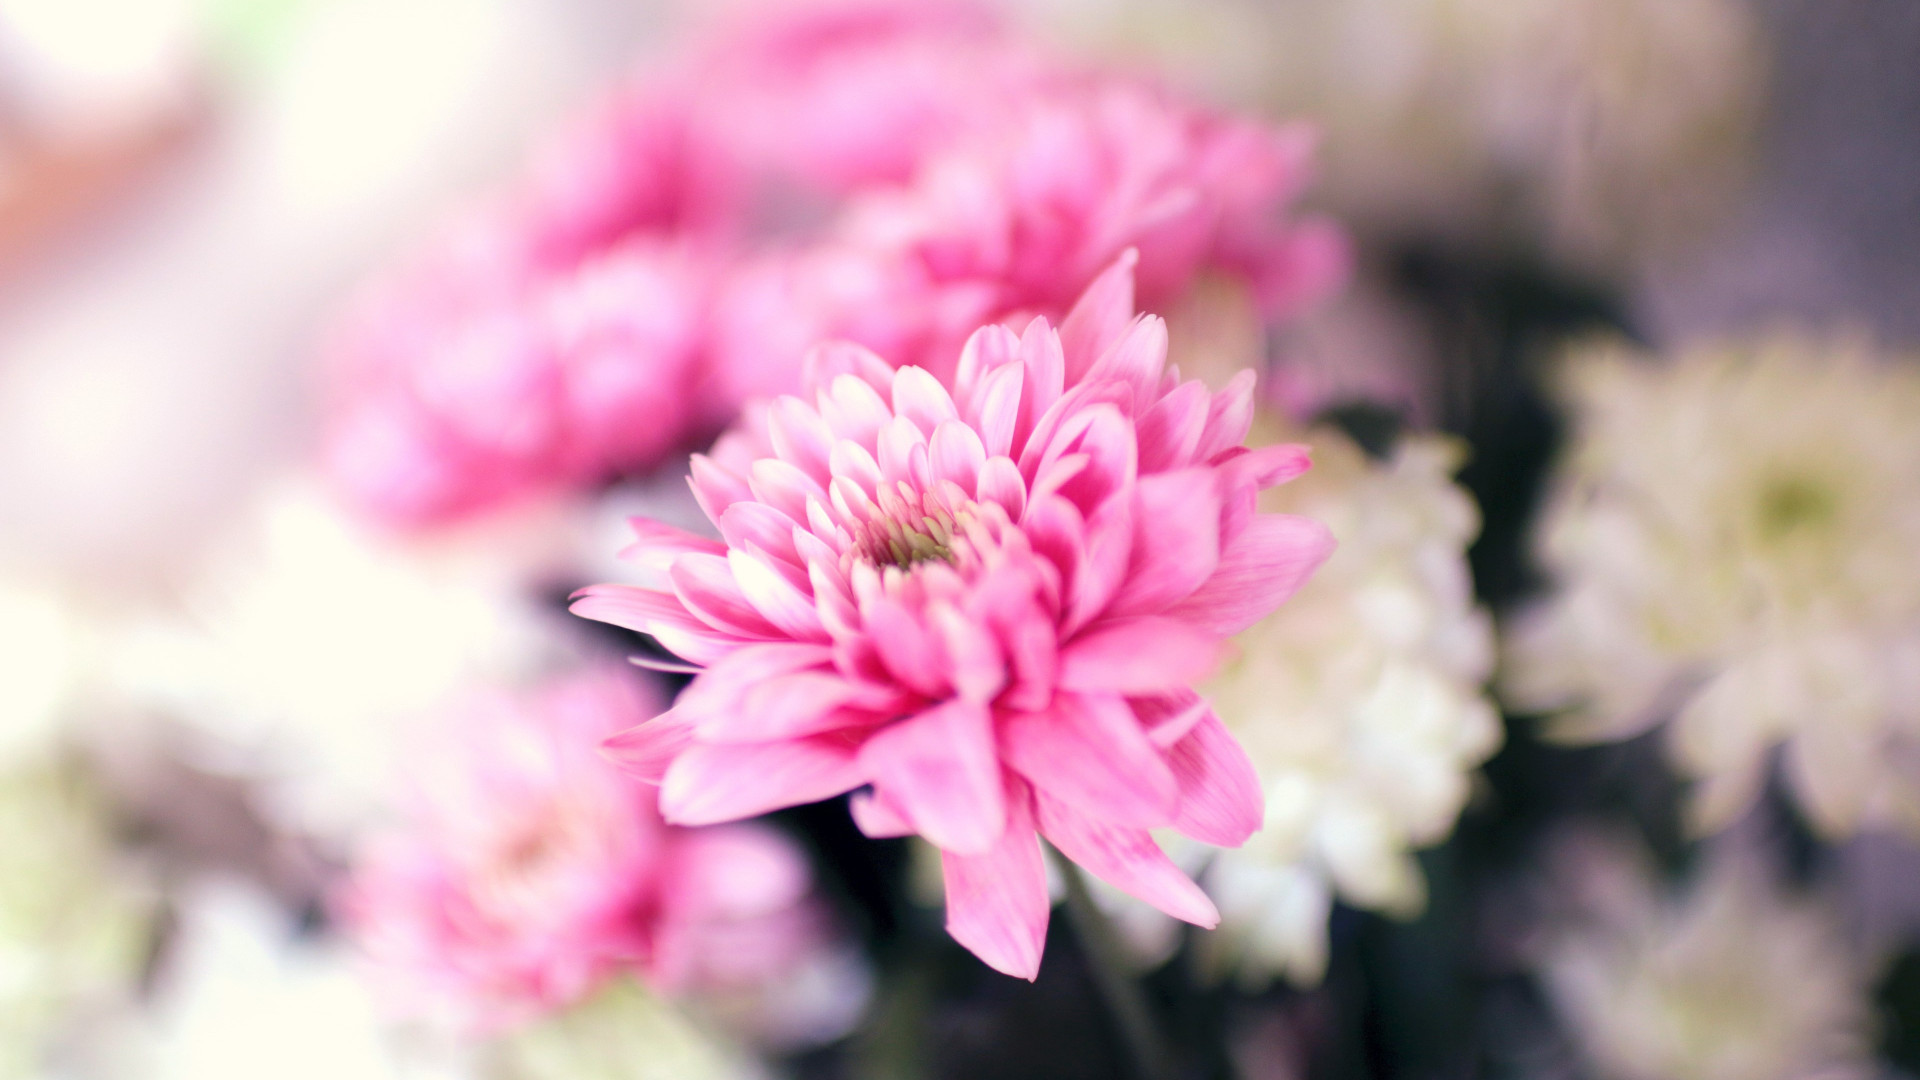 Pink and white flowers wallpaper 1920x1080